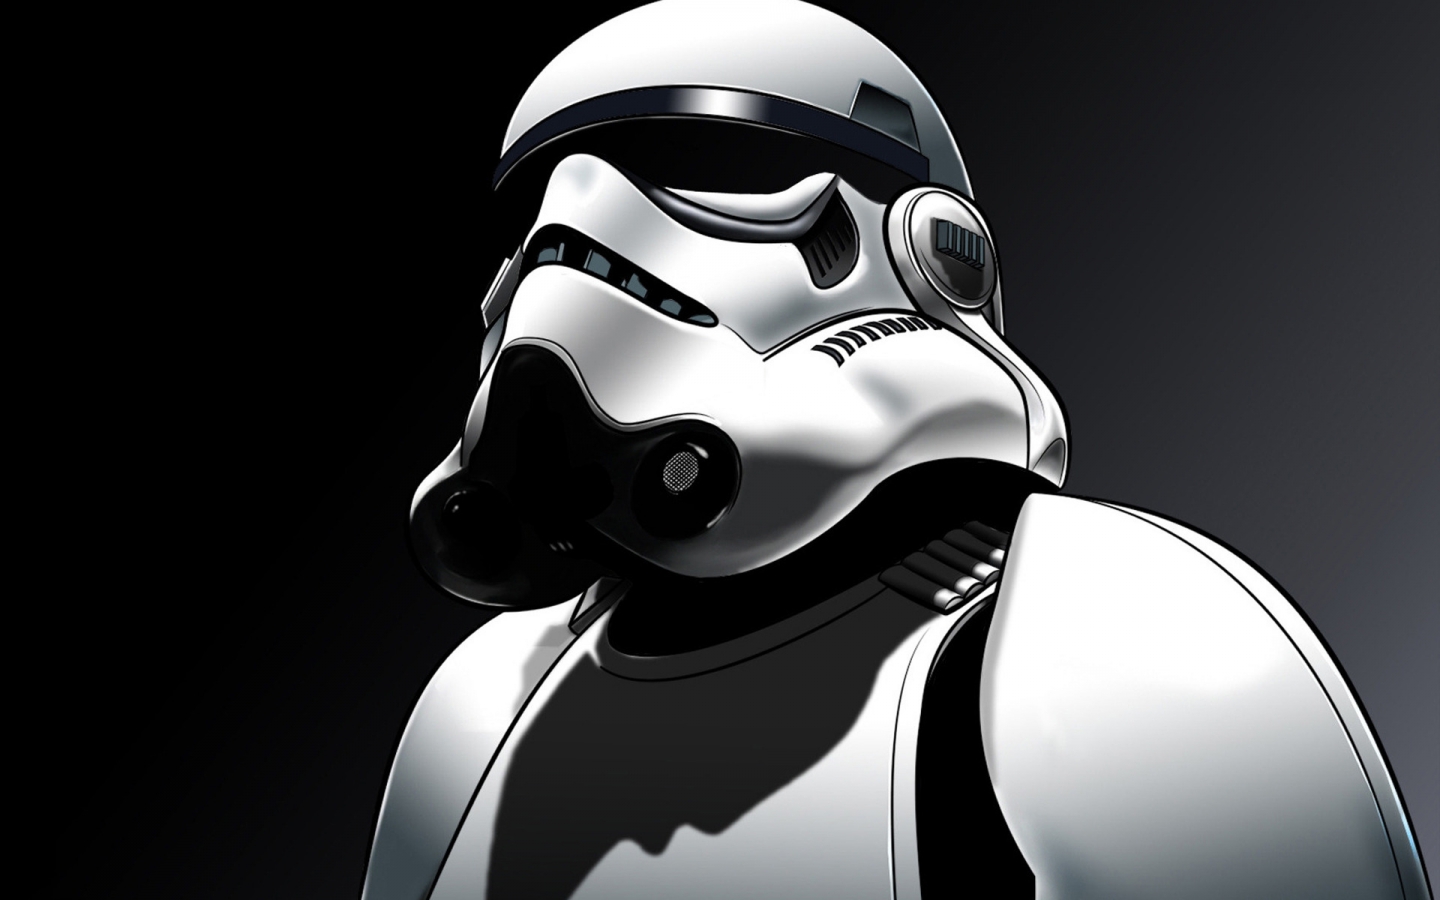 Star Wars Soldier for 1440 x 900 widescreen resolution